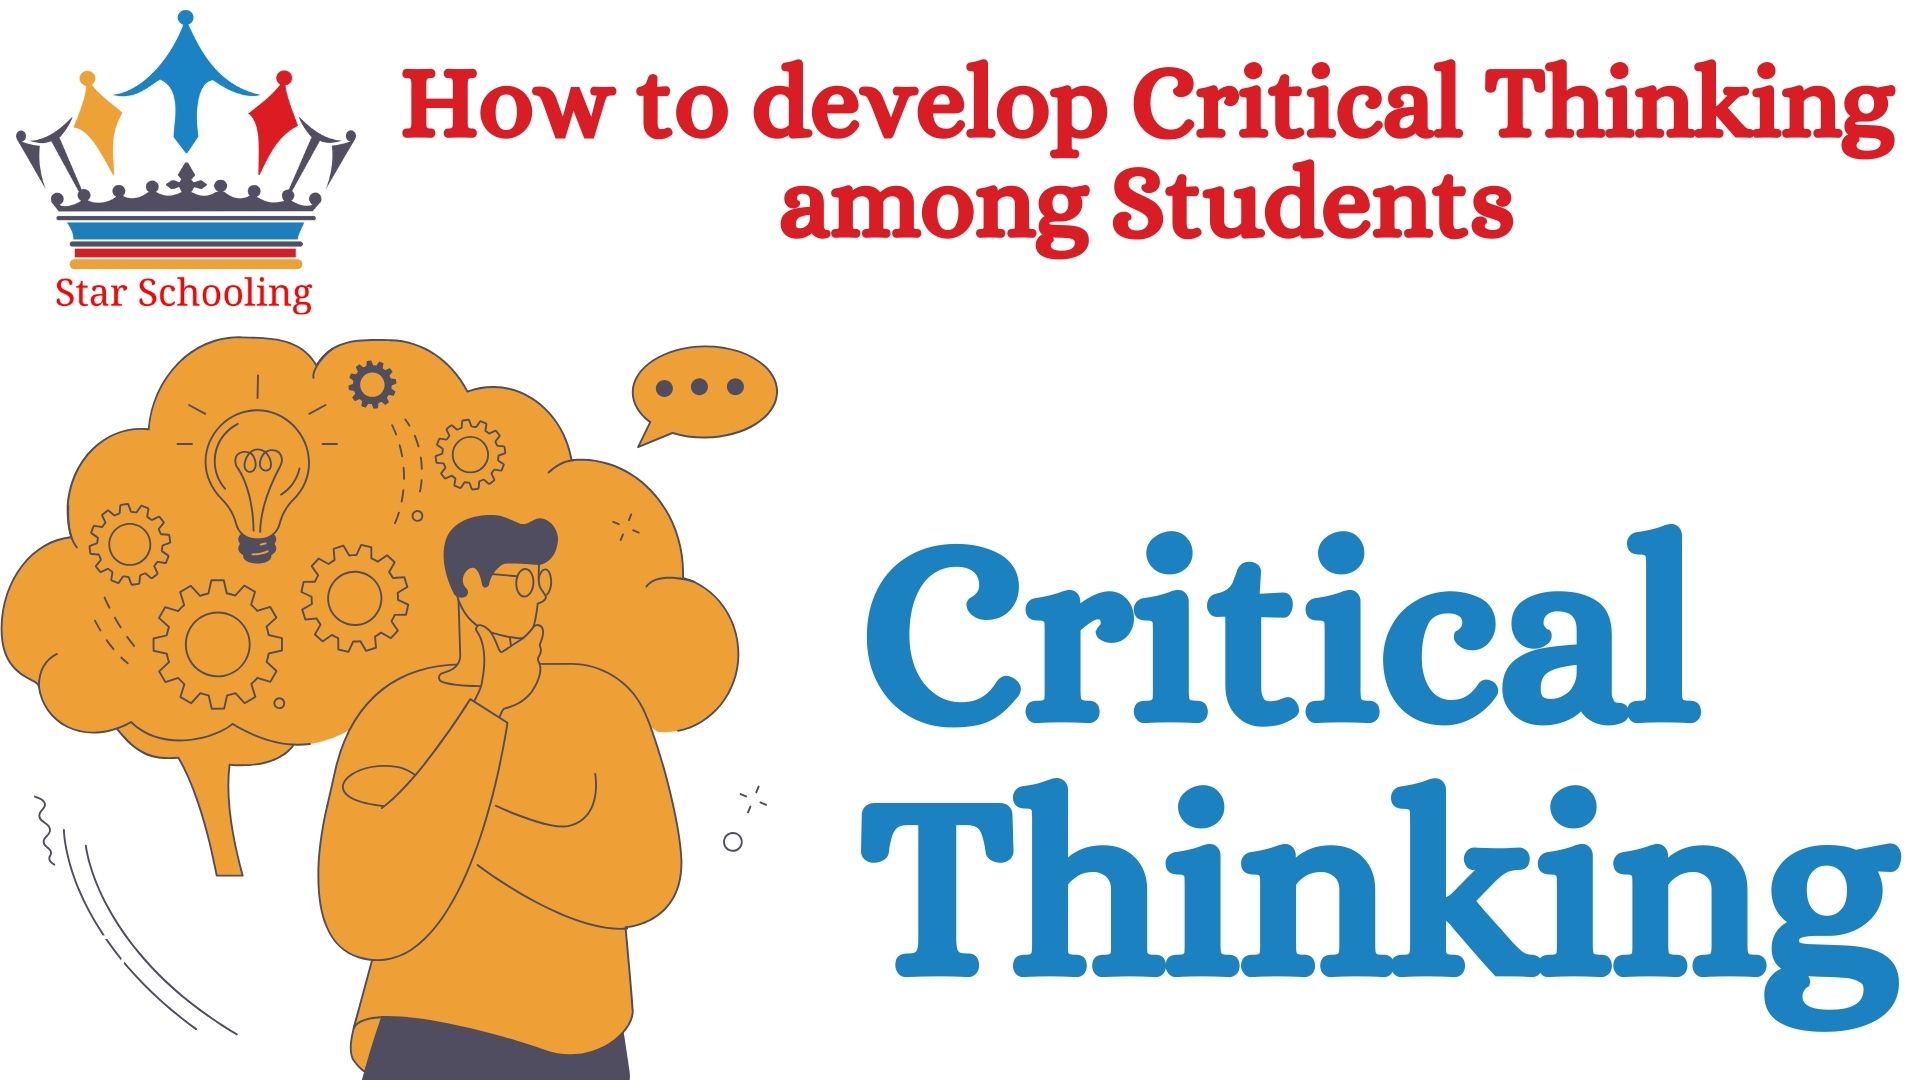 How to develop Critical Thinking among Students